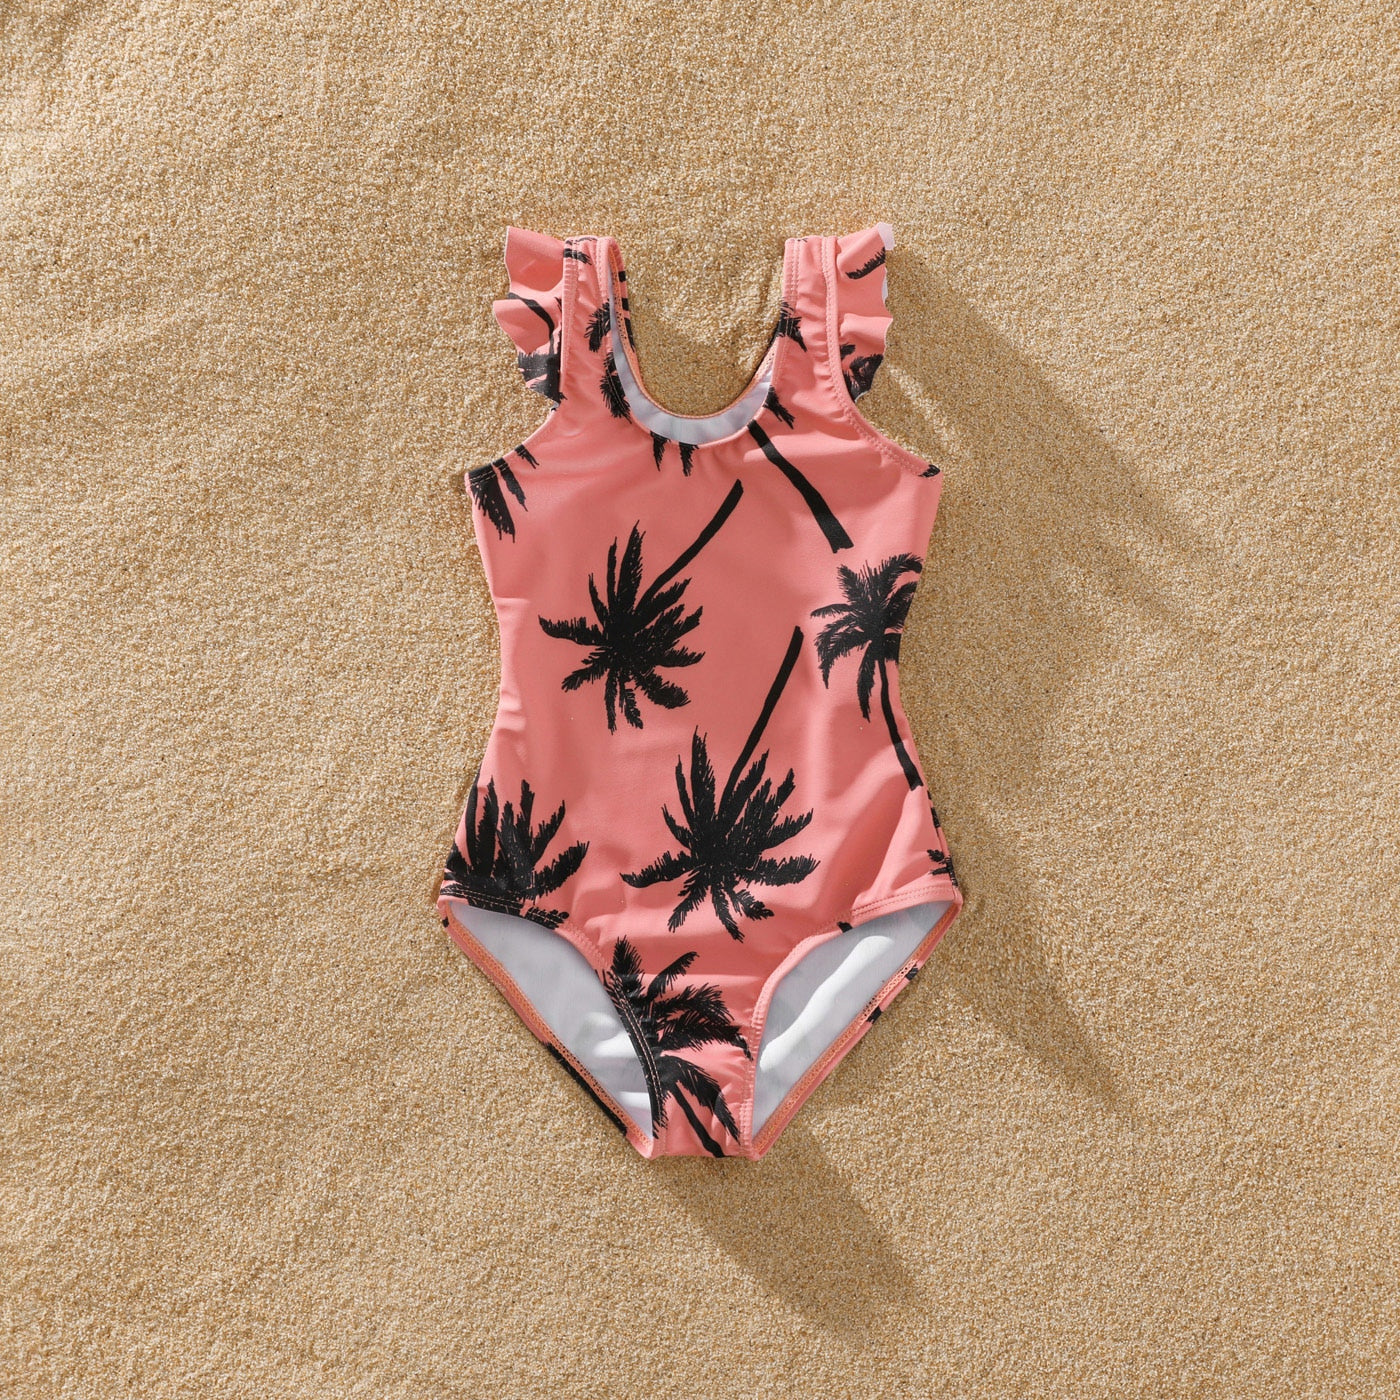 Family Matching! Pink Palm Tree One Piece Swimsuits & Trunks